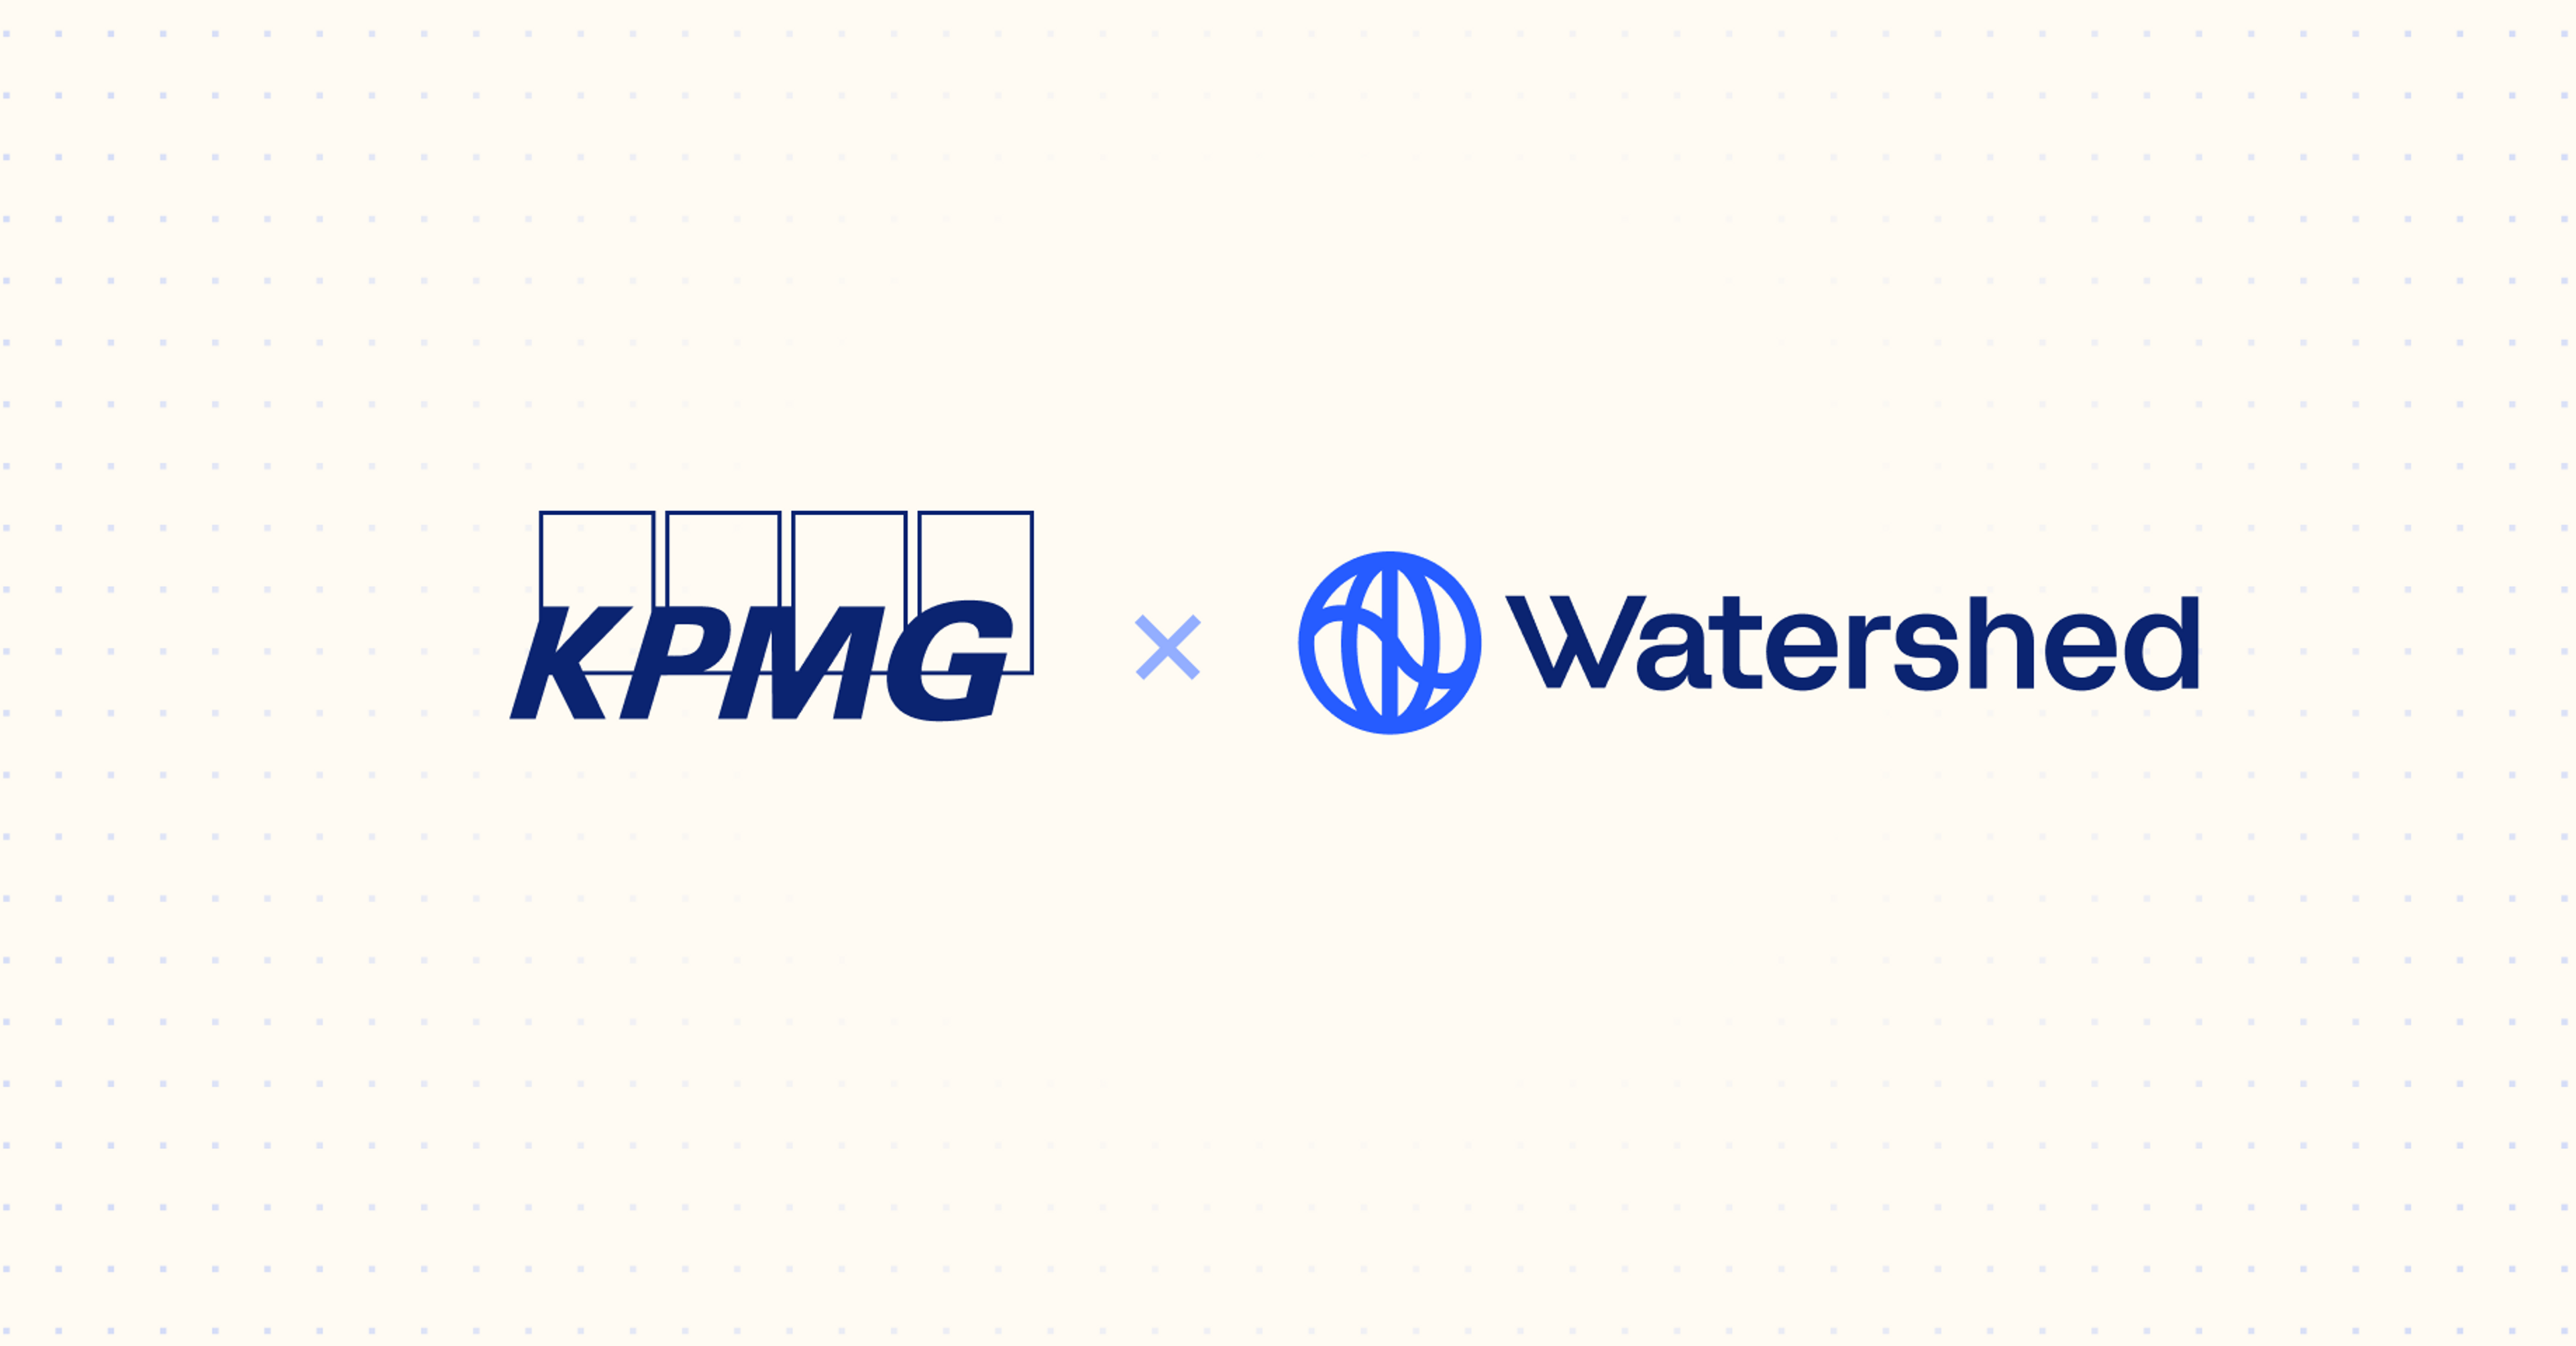 Watershed is partnering with KPMG